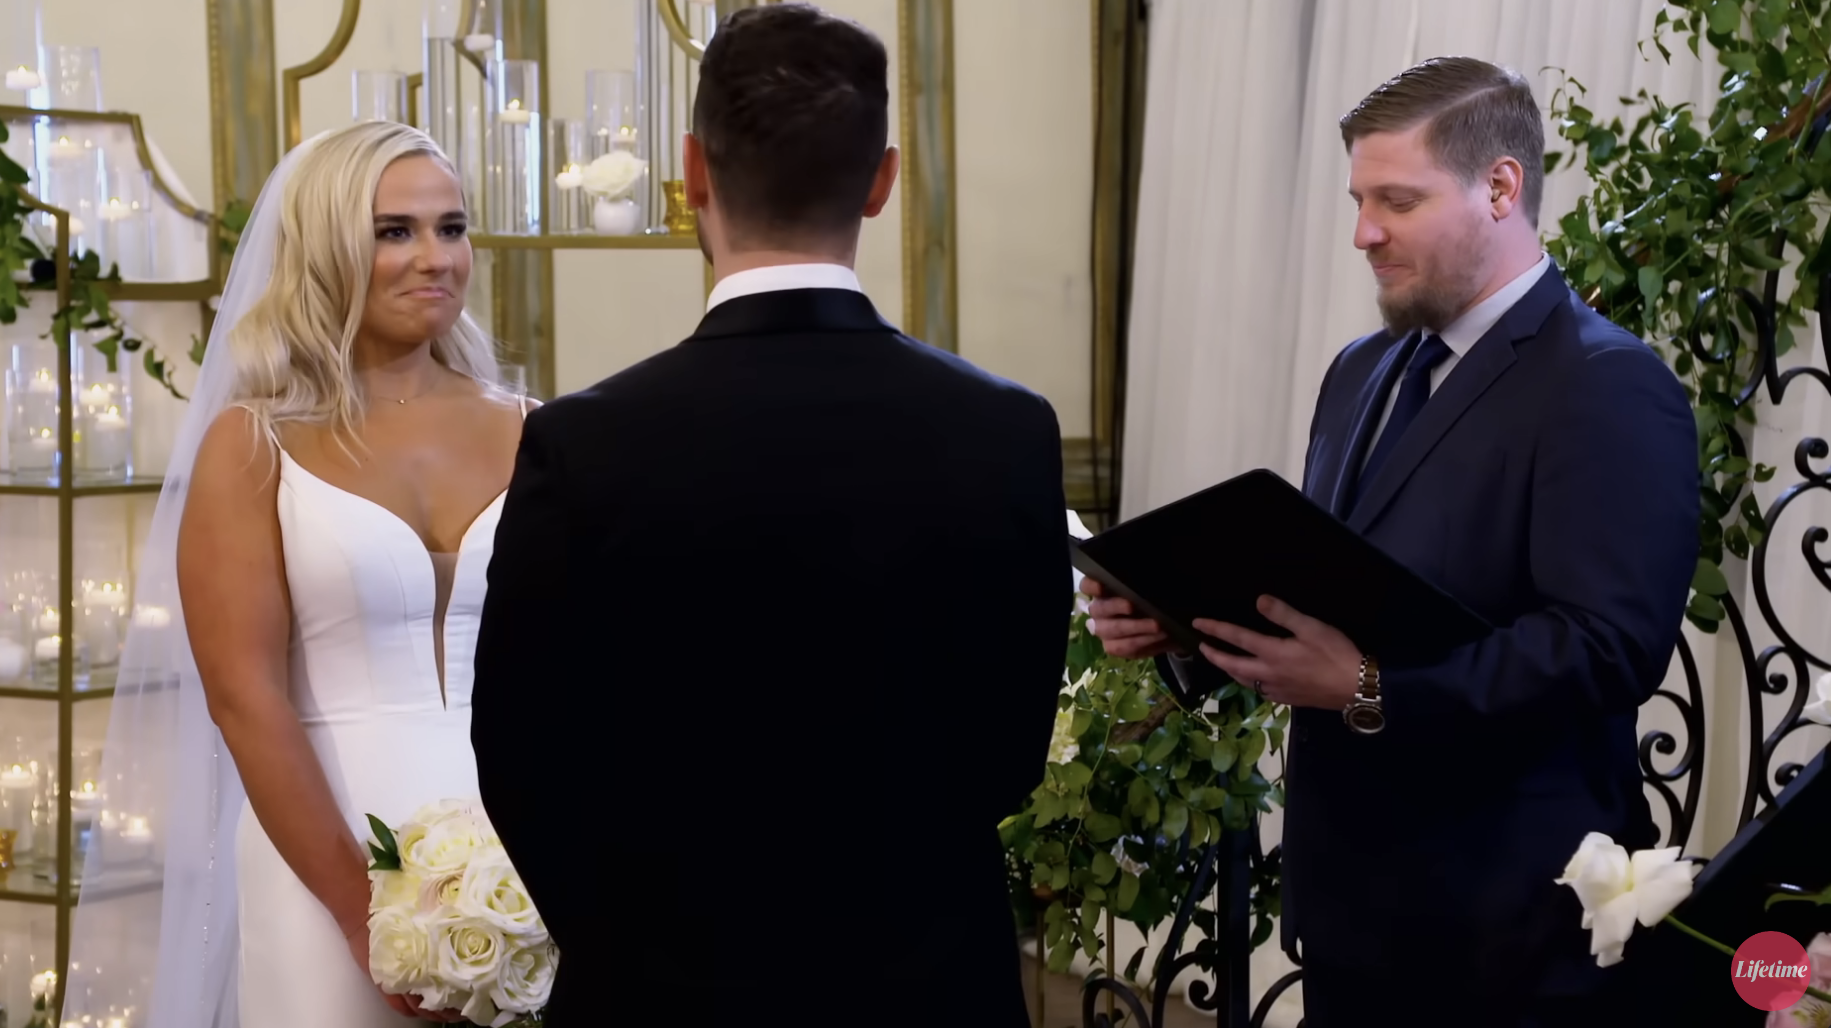 wedding day from episode of &quot;married at first sight&quot;